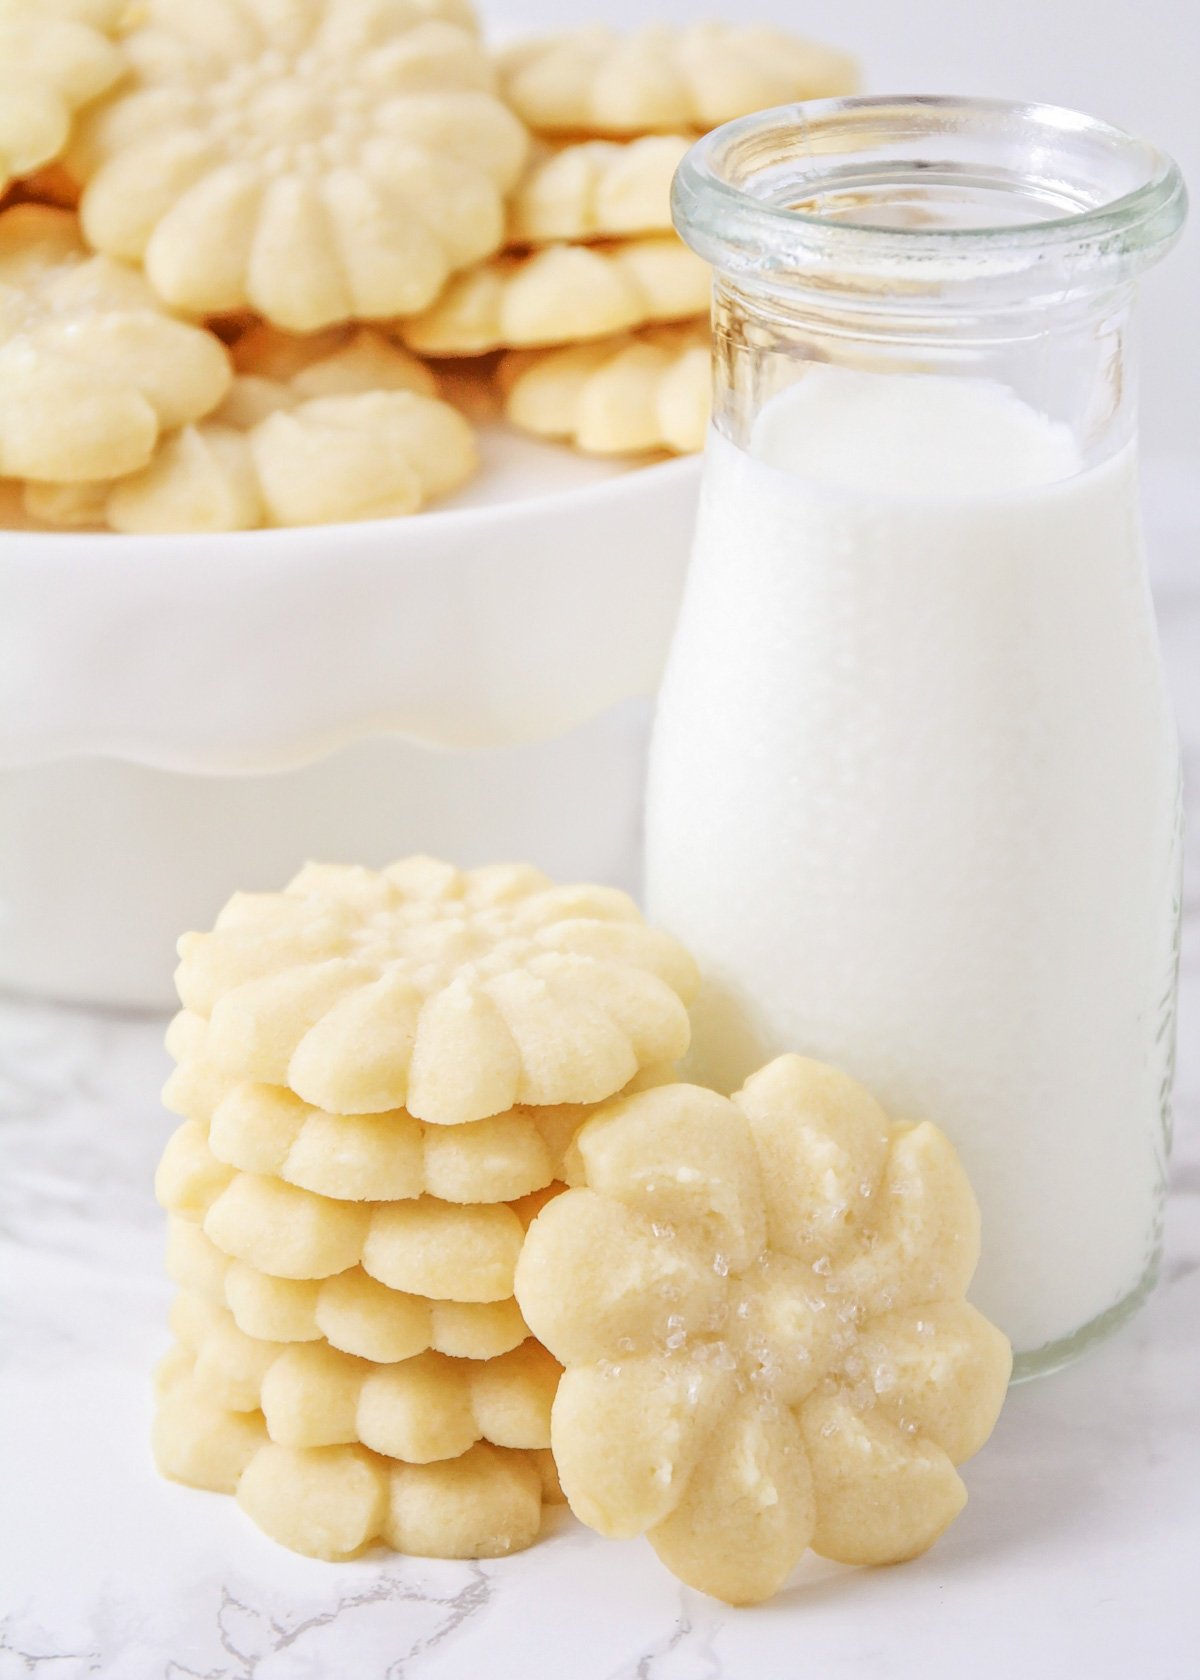 A stack of classic shortbread cookies next to a glass of milk.